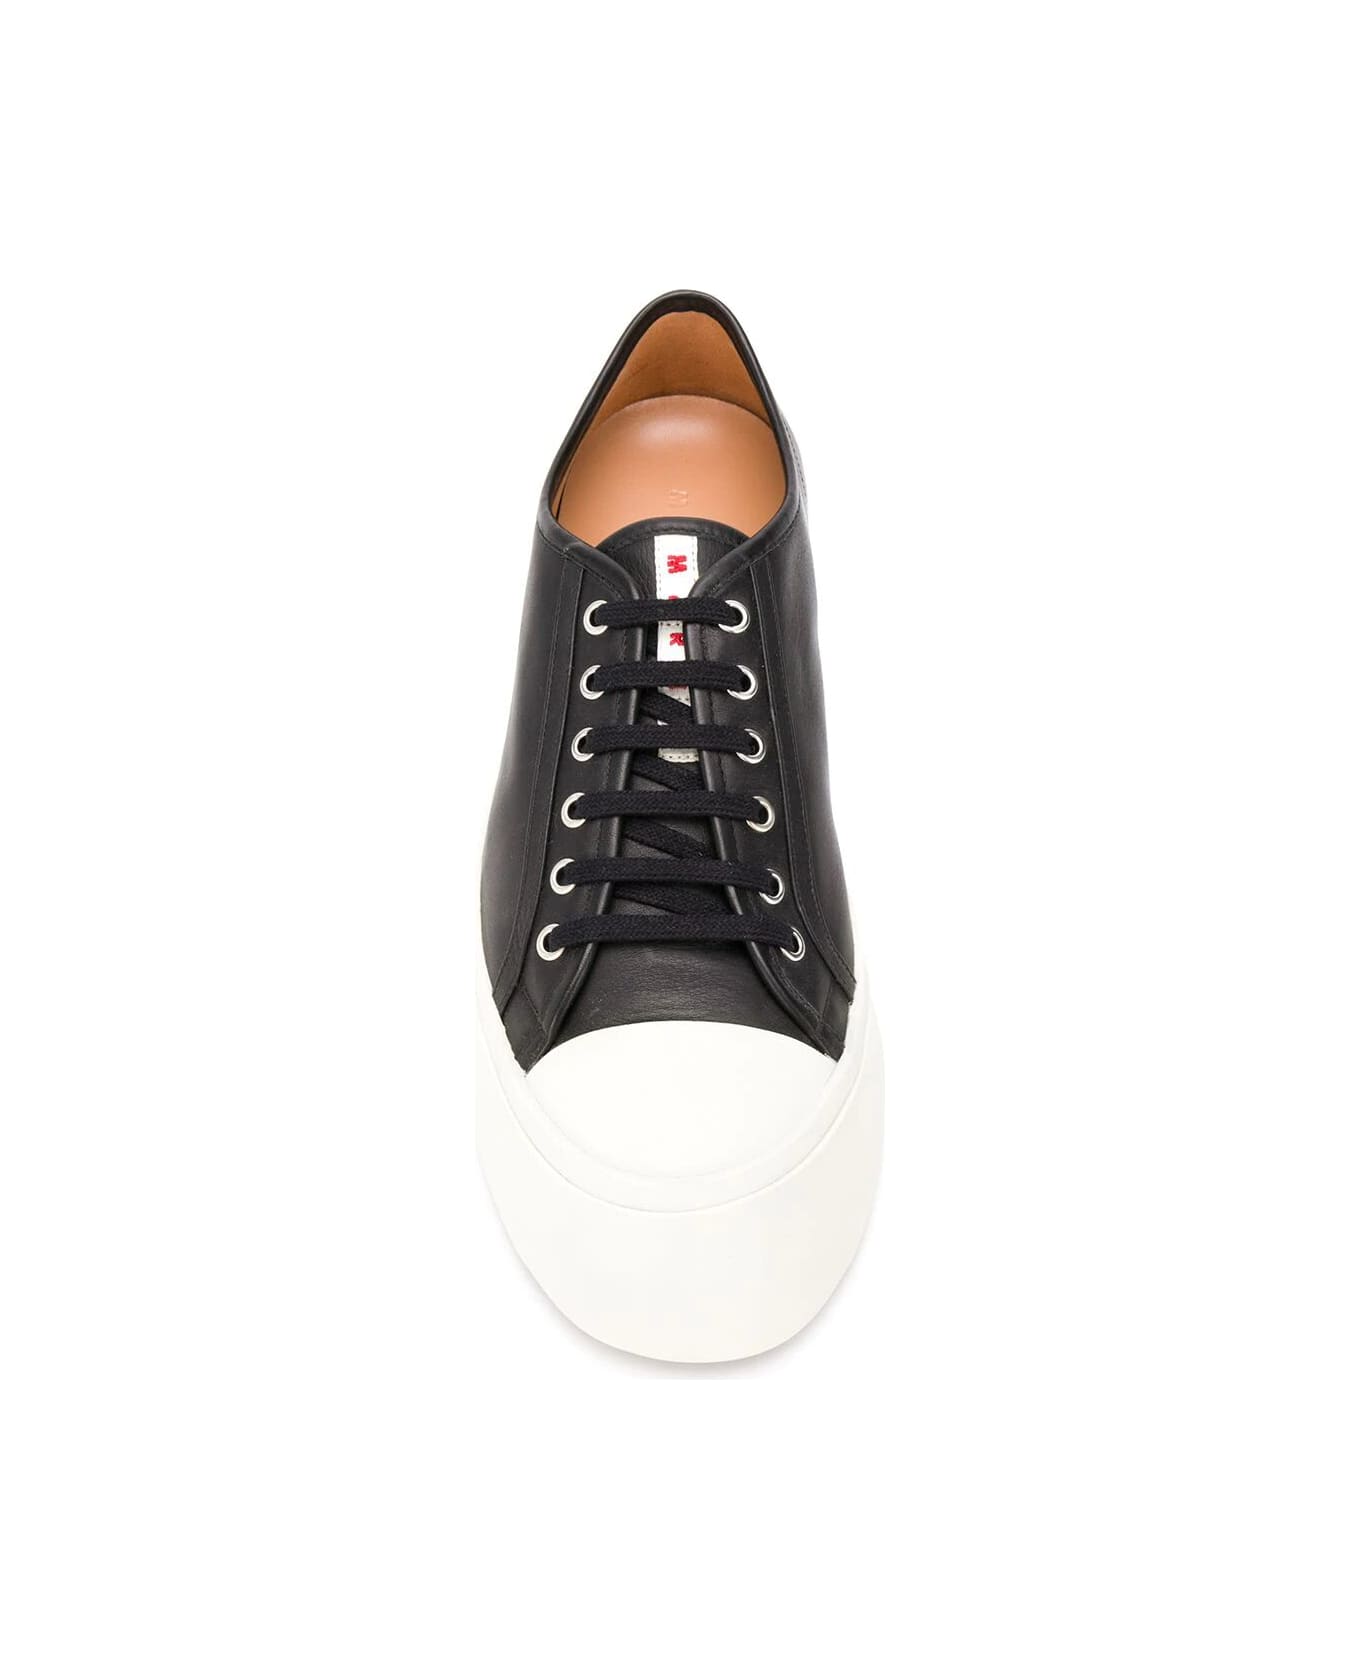 Marni Lace Up Sneakers - Black スニーカー